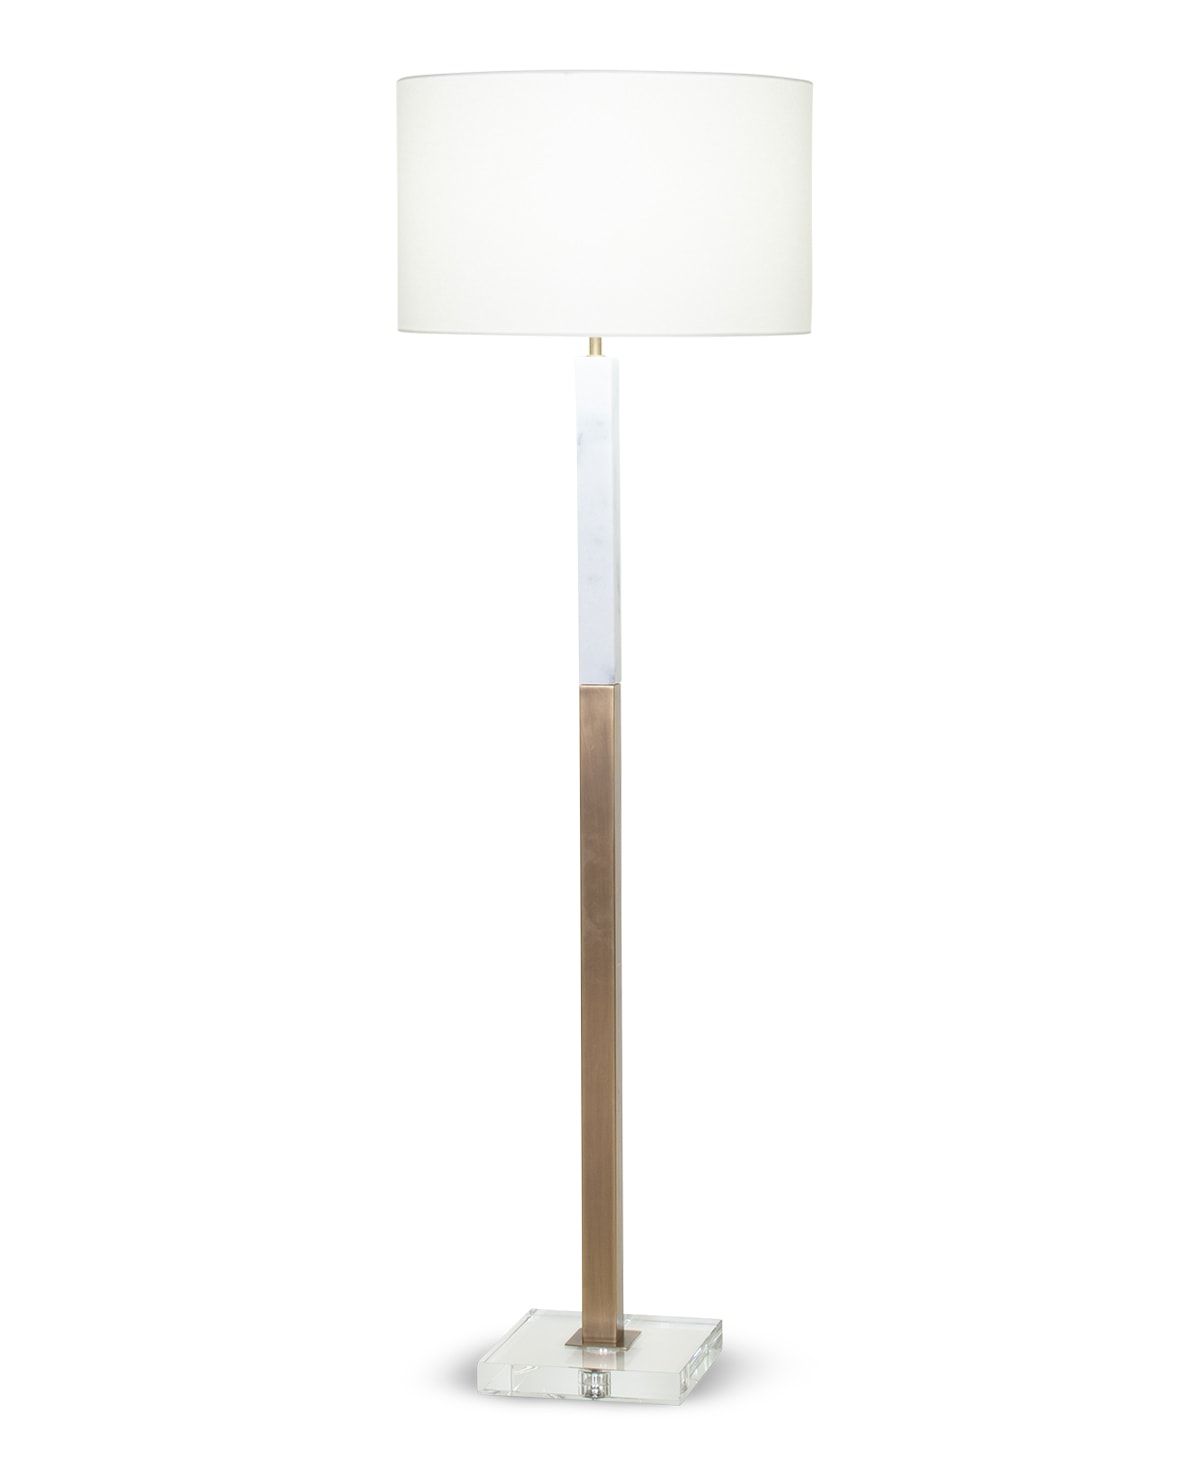 FlowDecor Sanders Floor Lamp in white marble and metal with antique brass finish and crystal and off-white linen drum shade (# 4354)